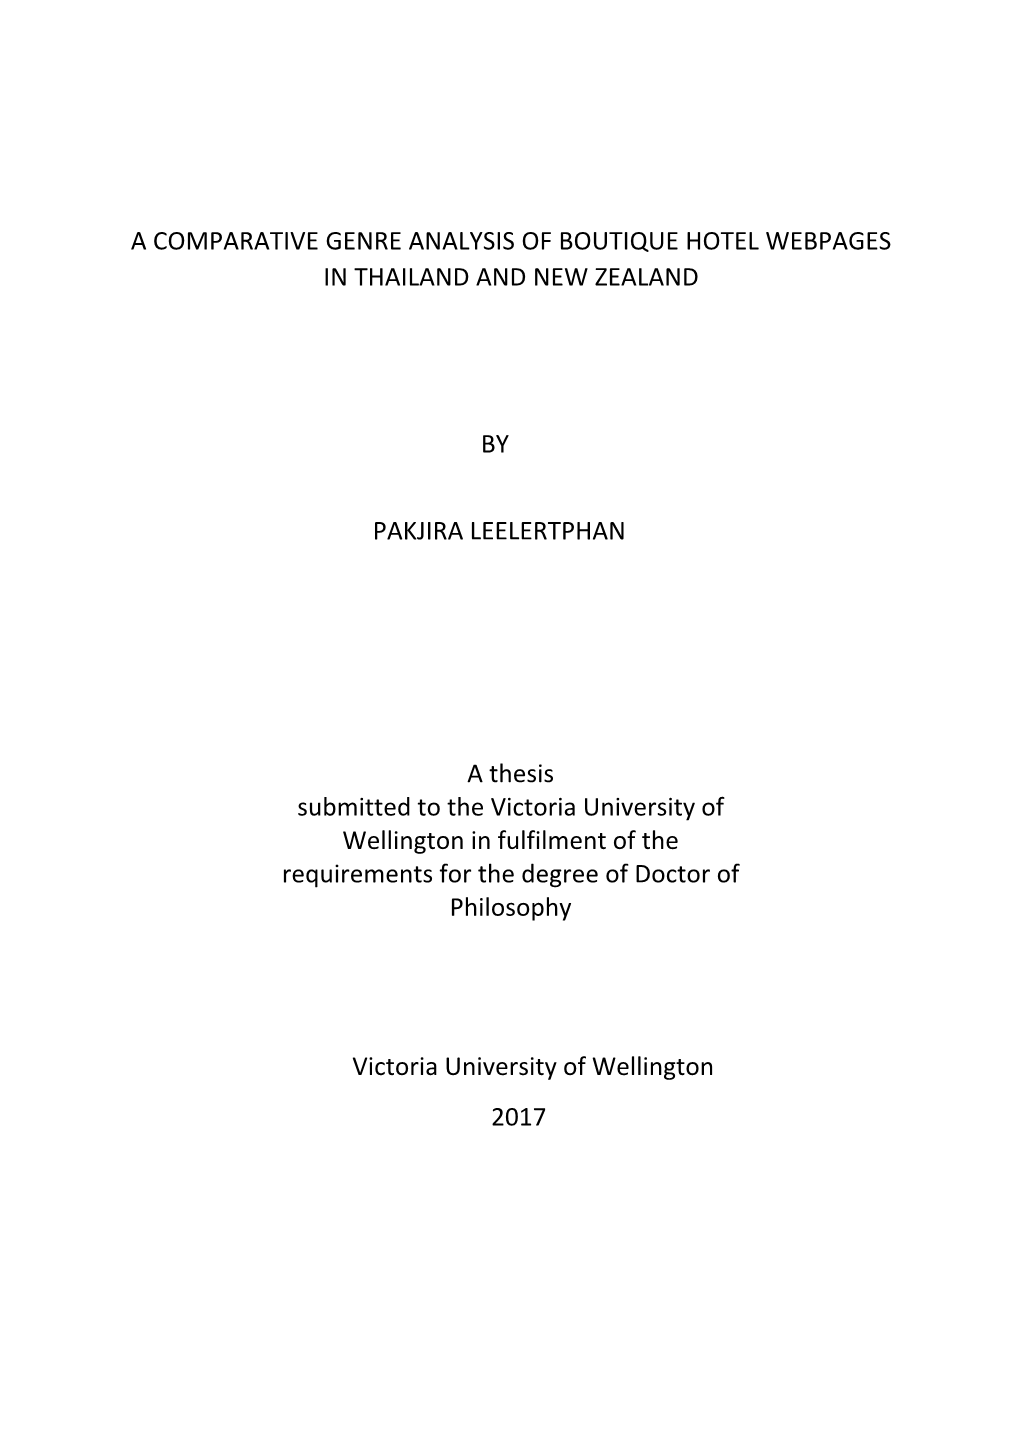 A COMPARATIVE GENRE ANALYSIS of BOUTIQUE HOTEL WEBPAGES in THAILAND and NEW ZEALAND by PAKJIRA LEELERTPHAN a Thesis Submitted To